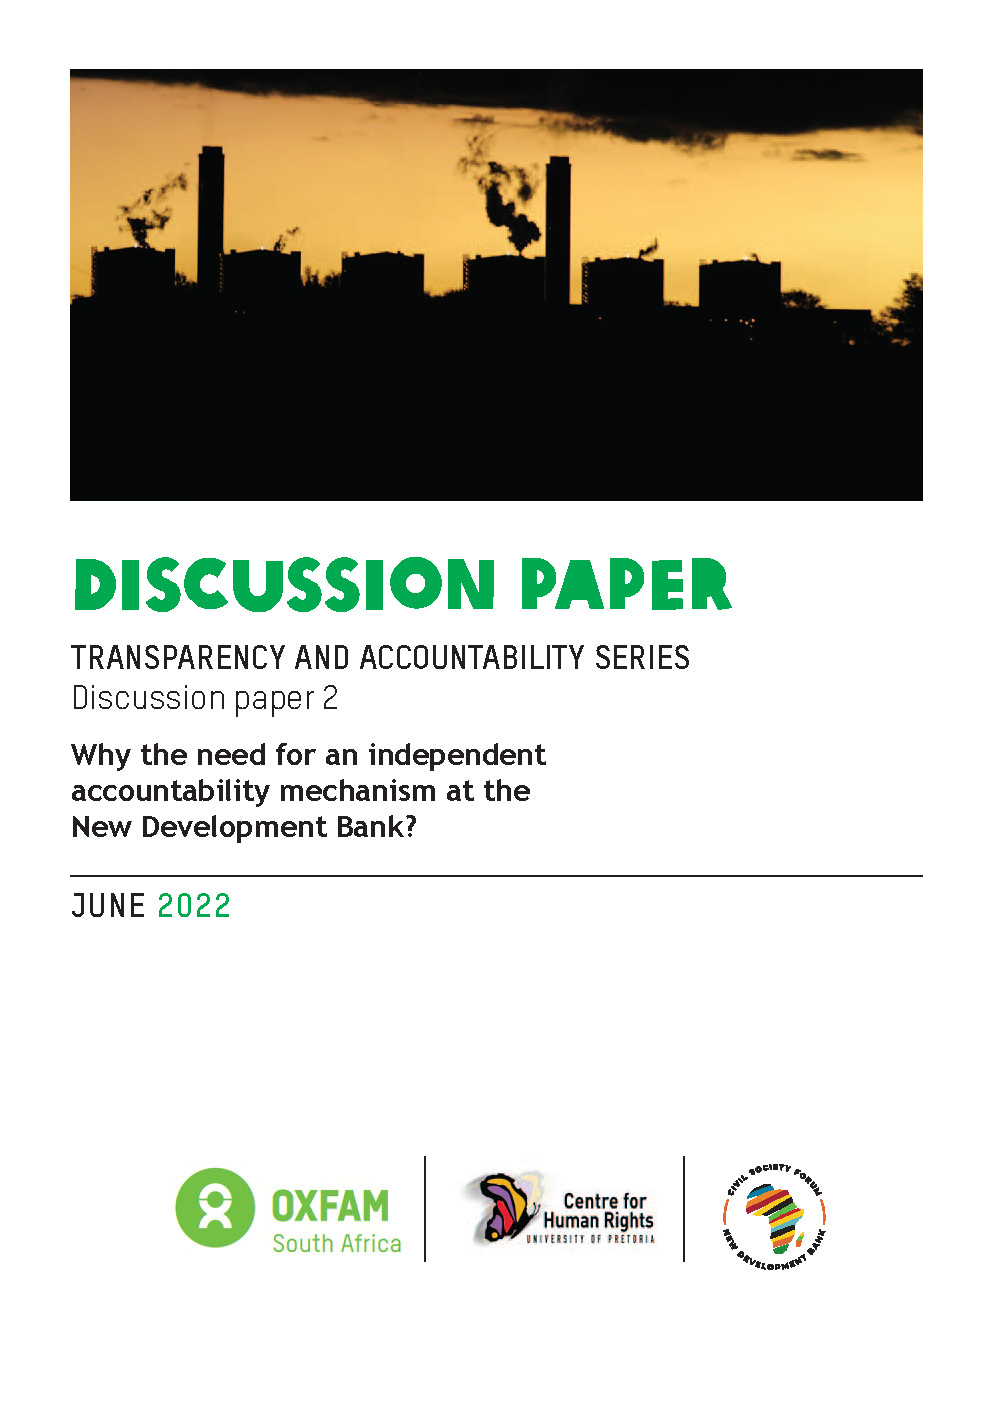 Transparency and Accountability Series Discussion Paper 2